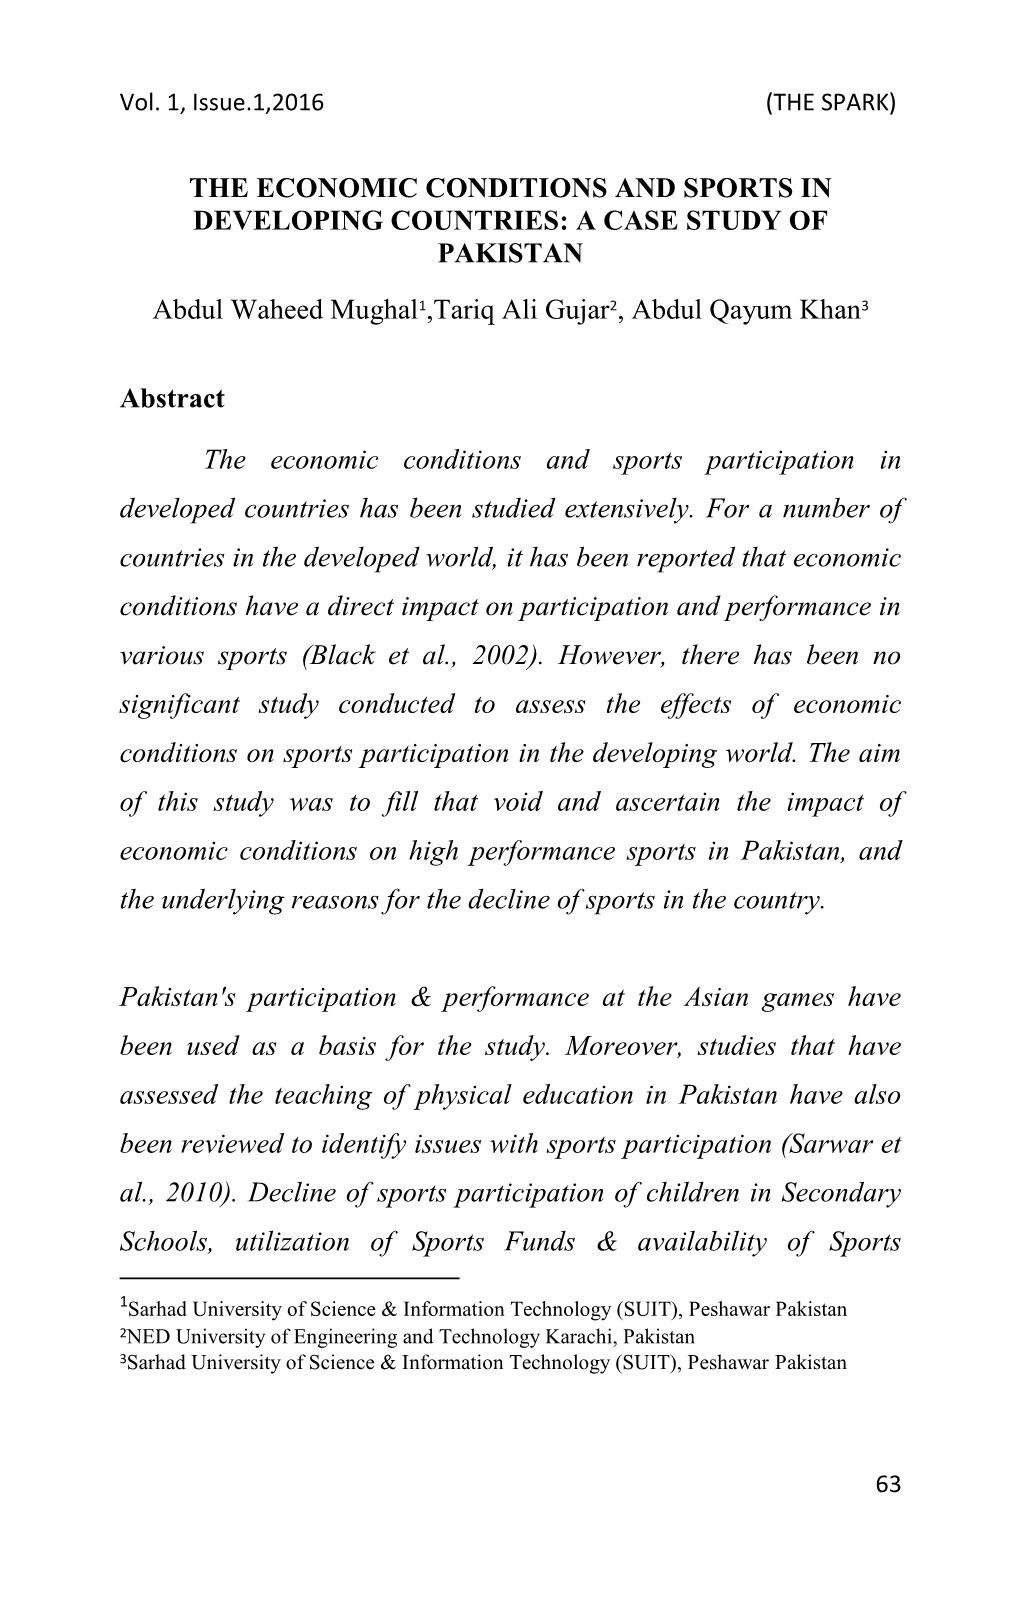 The Economic Conditions and Sports in Developing Countries: a Case Study of Pakistan